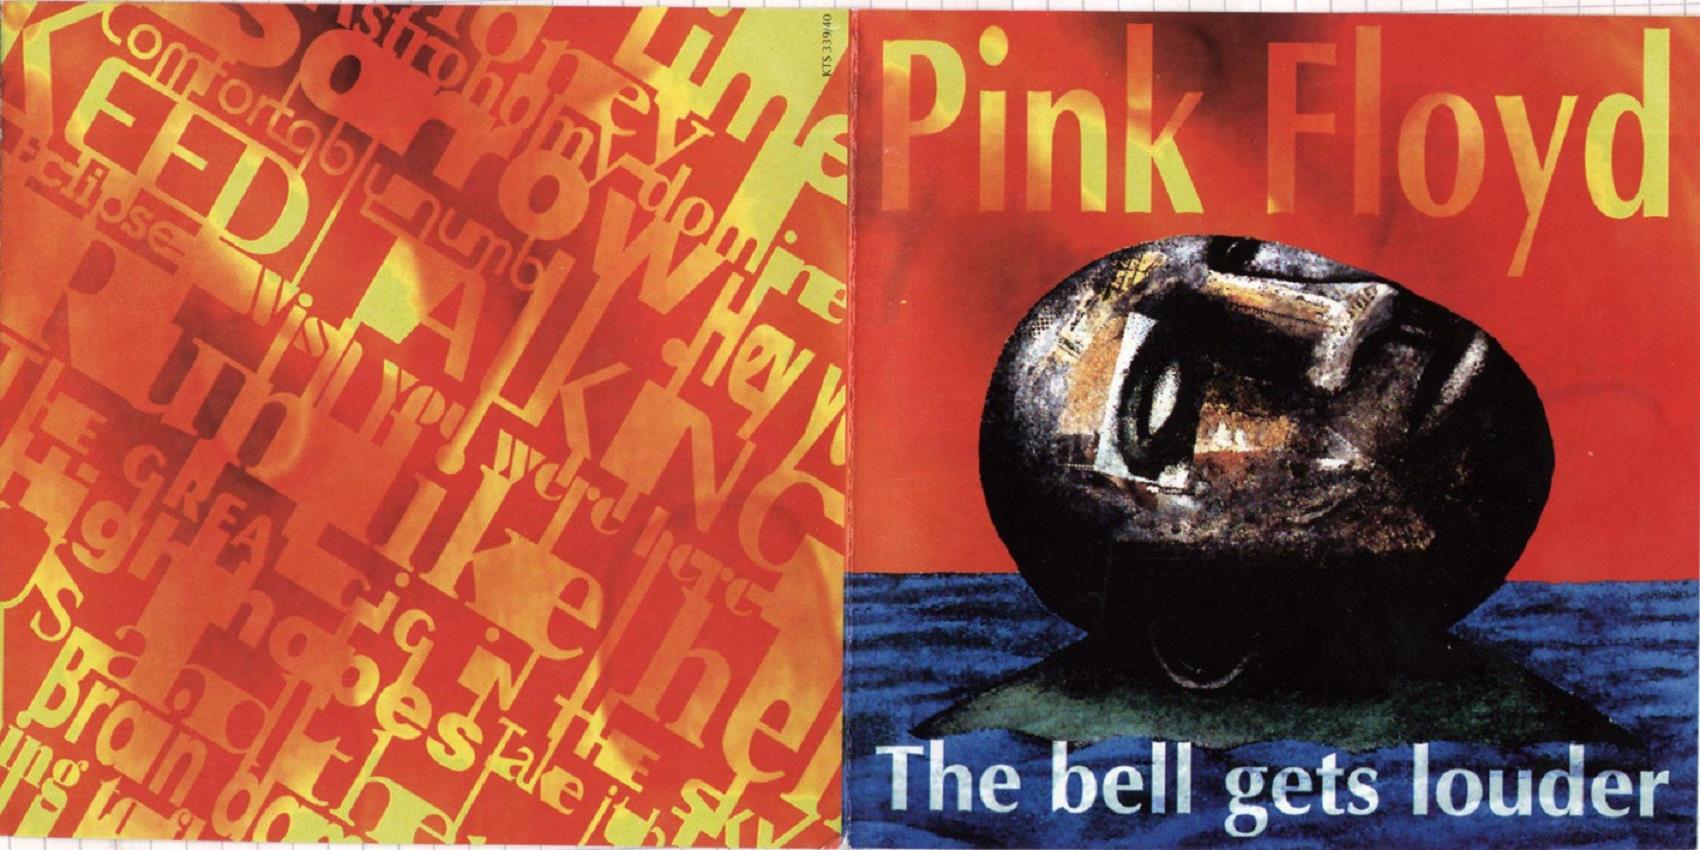 1994-06-11-the_bell_gets_louder-front